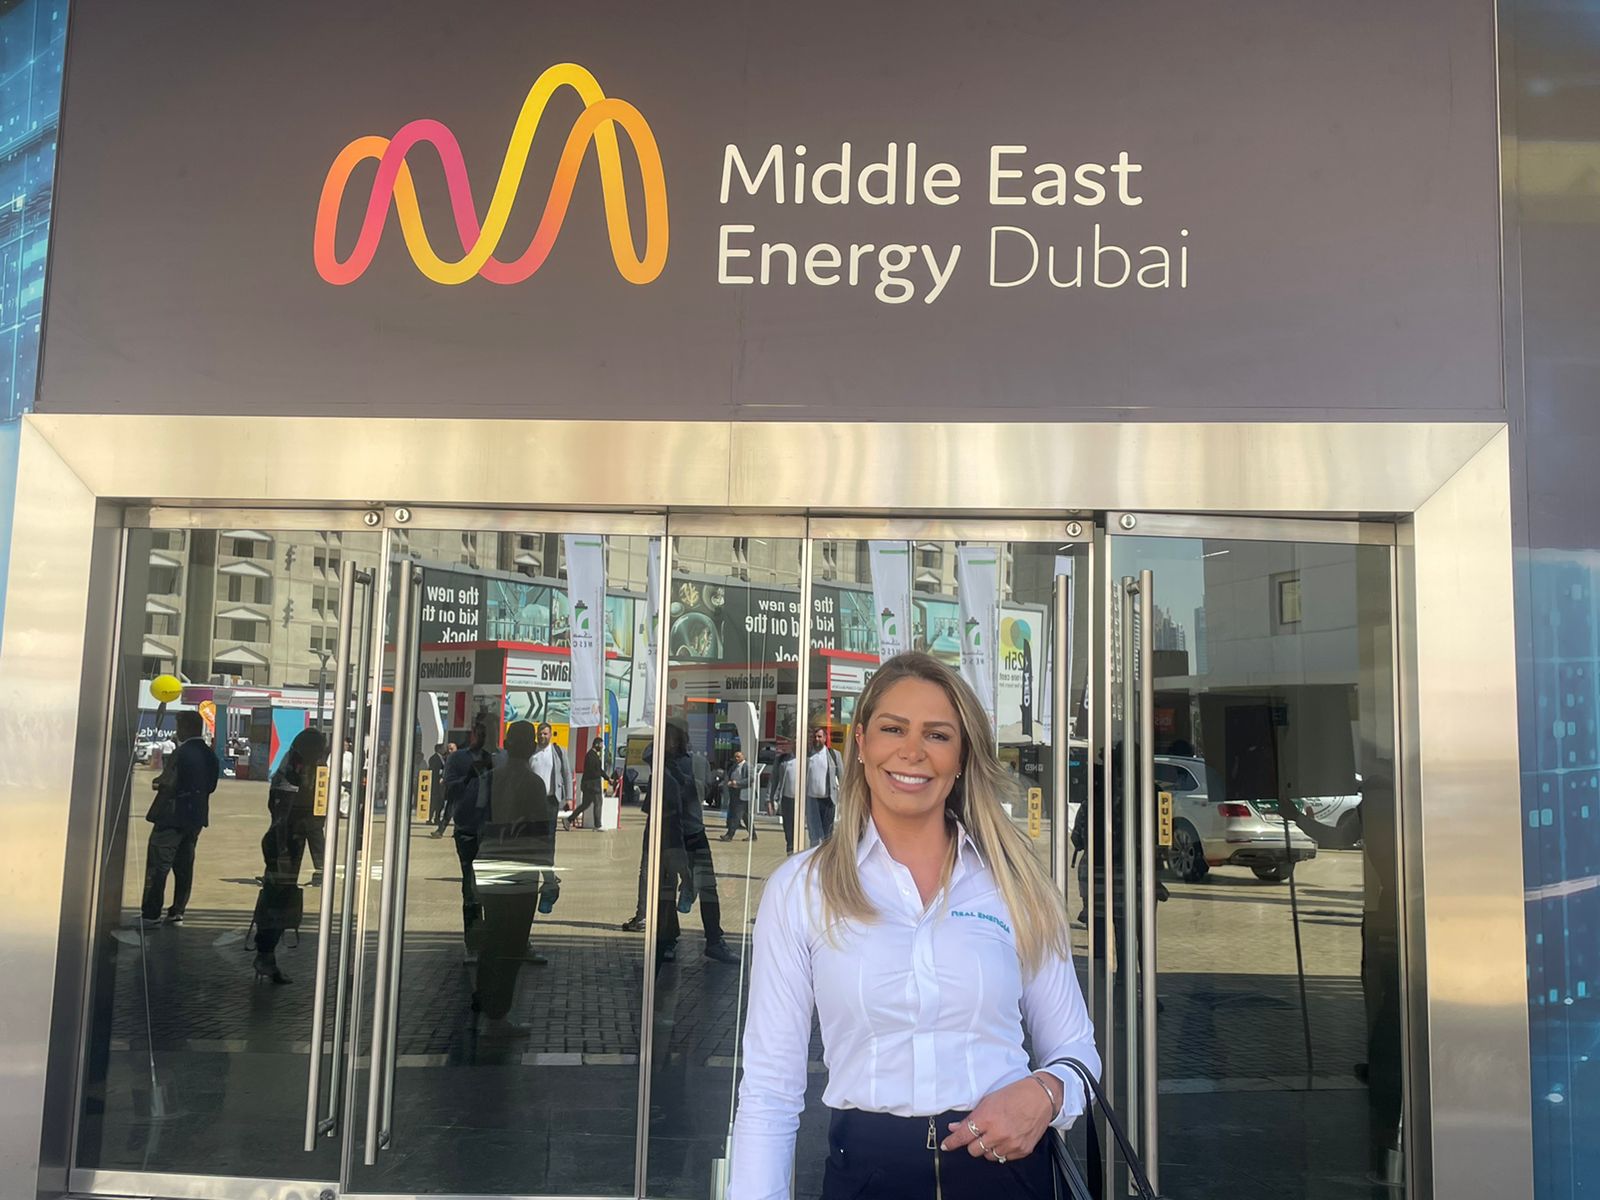  Inter Solar Middle East Energy